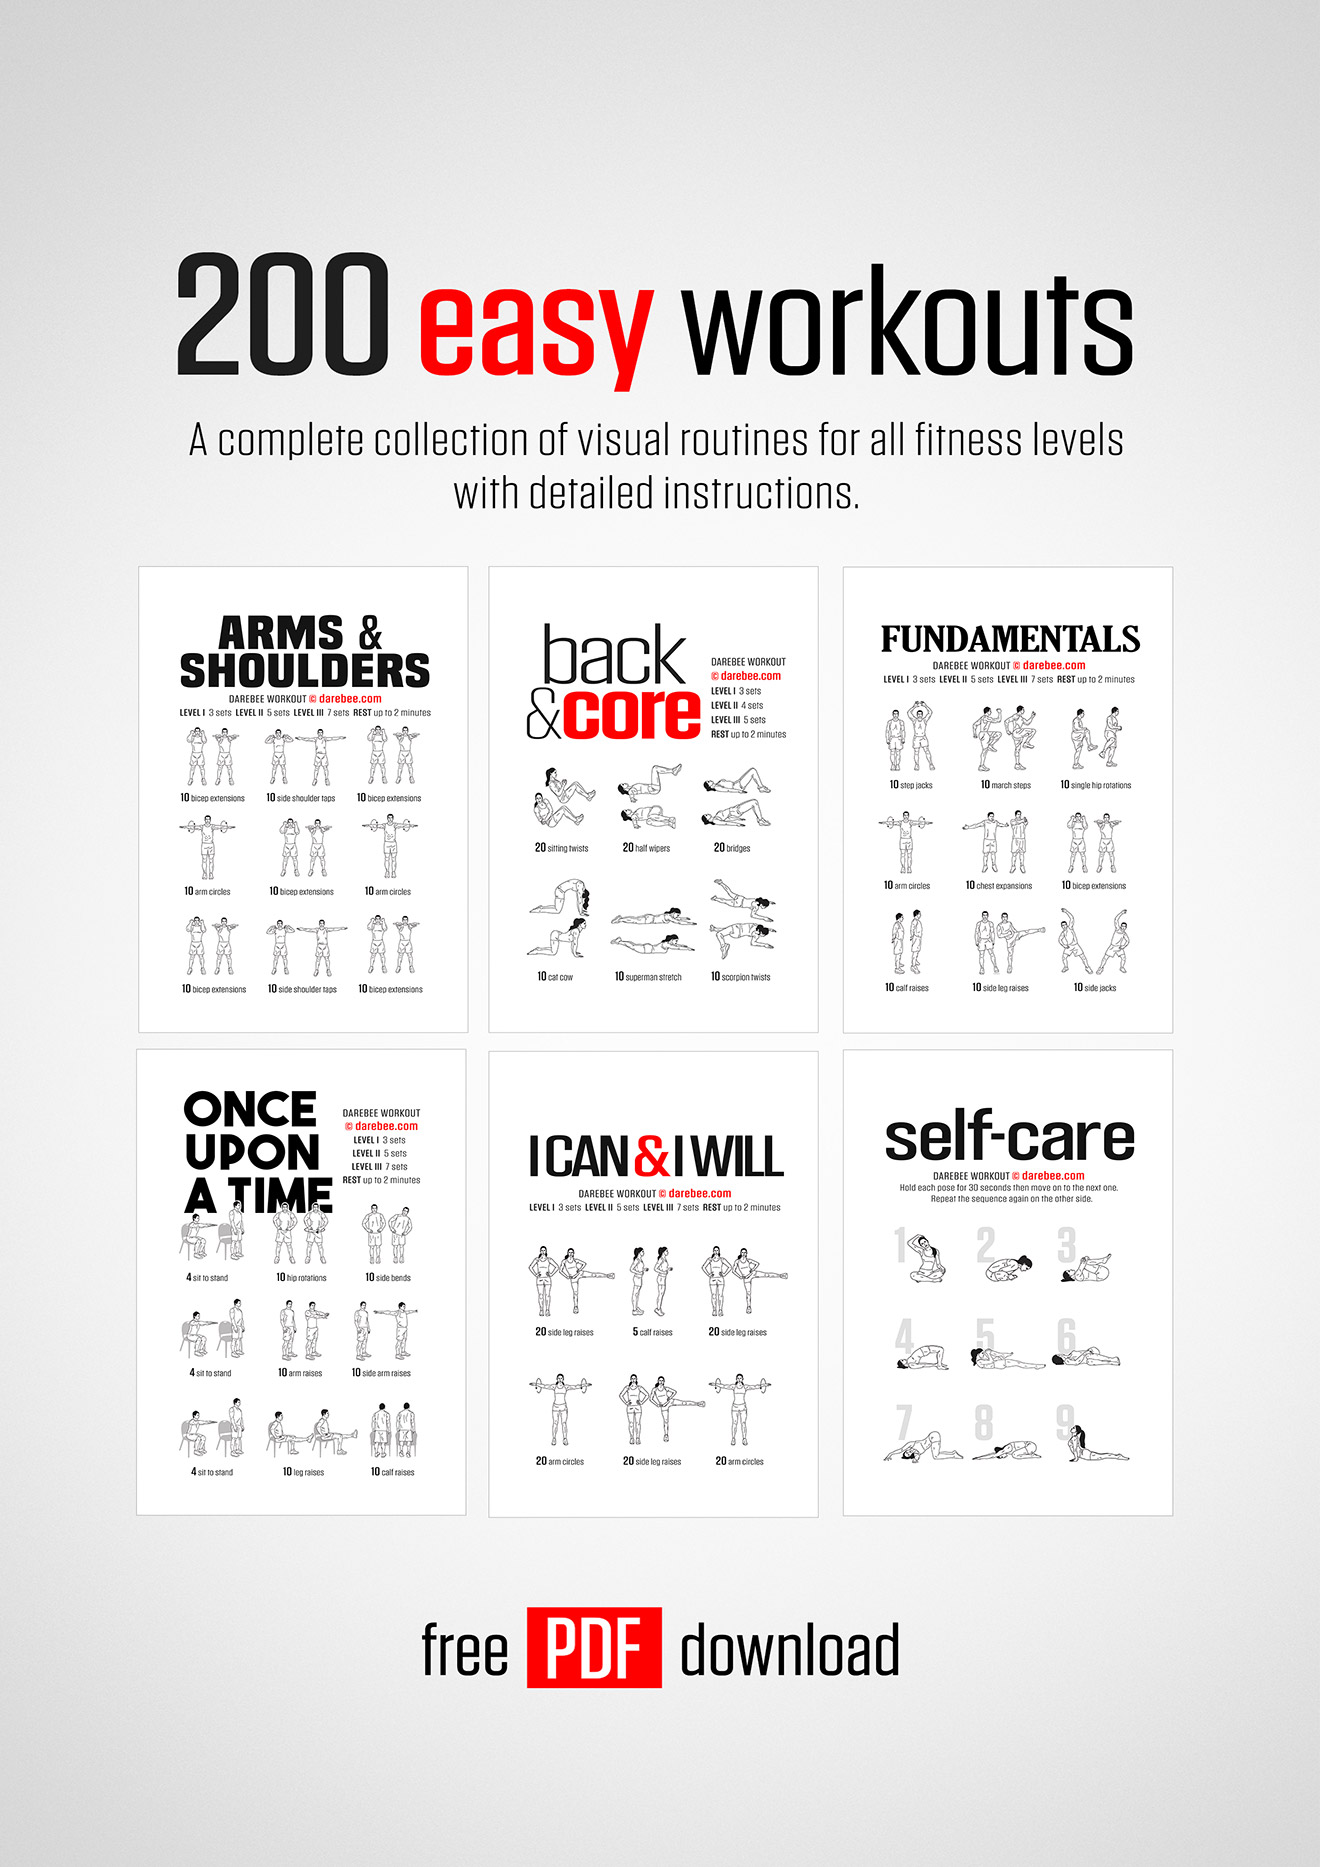 200 Easy Workouts by DAREBEE